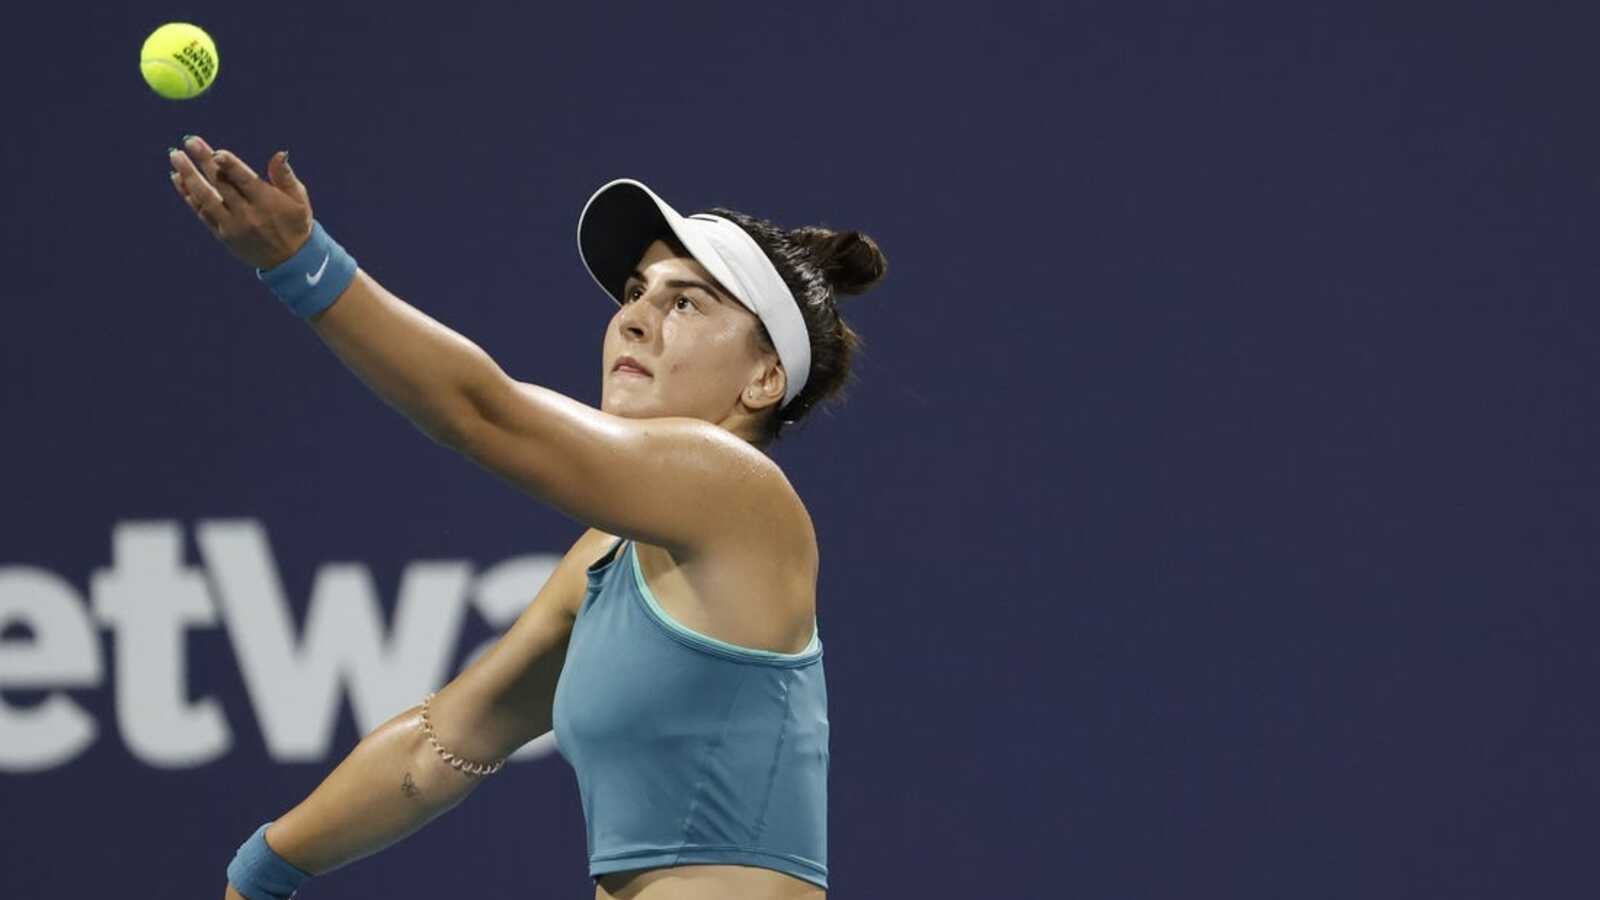 Bianca Andreescu on injury: 'Praying for nothing serious'